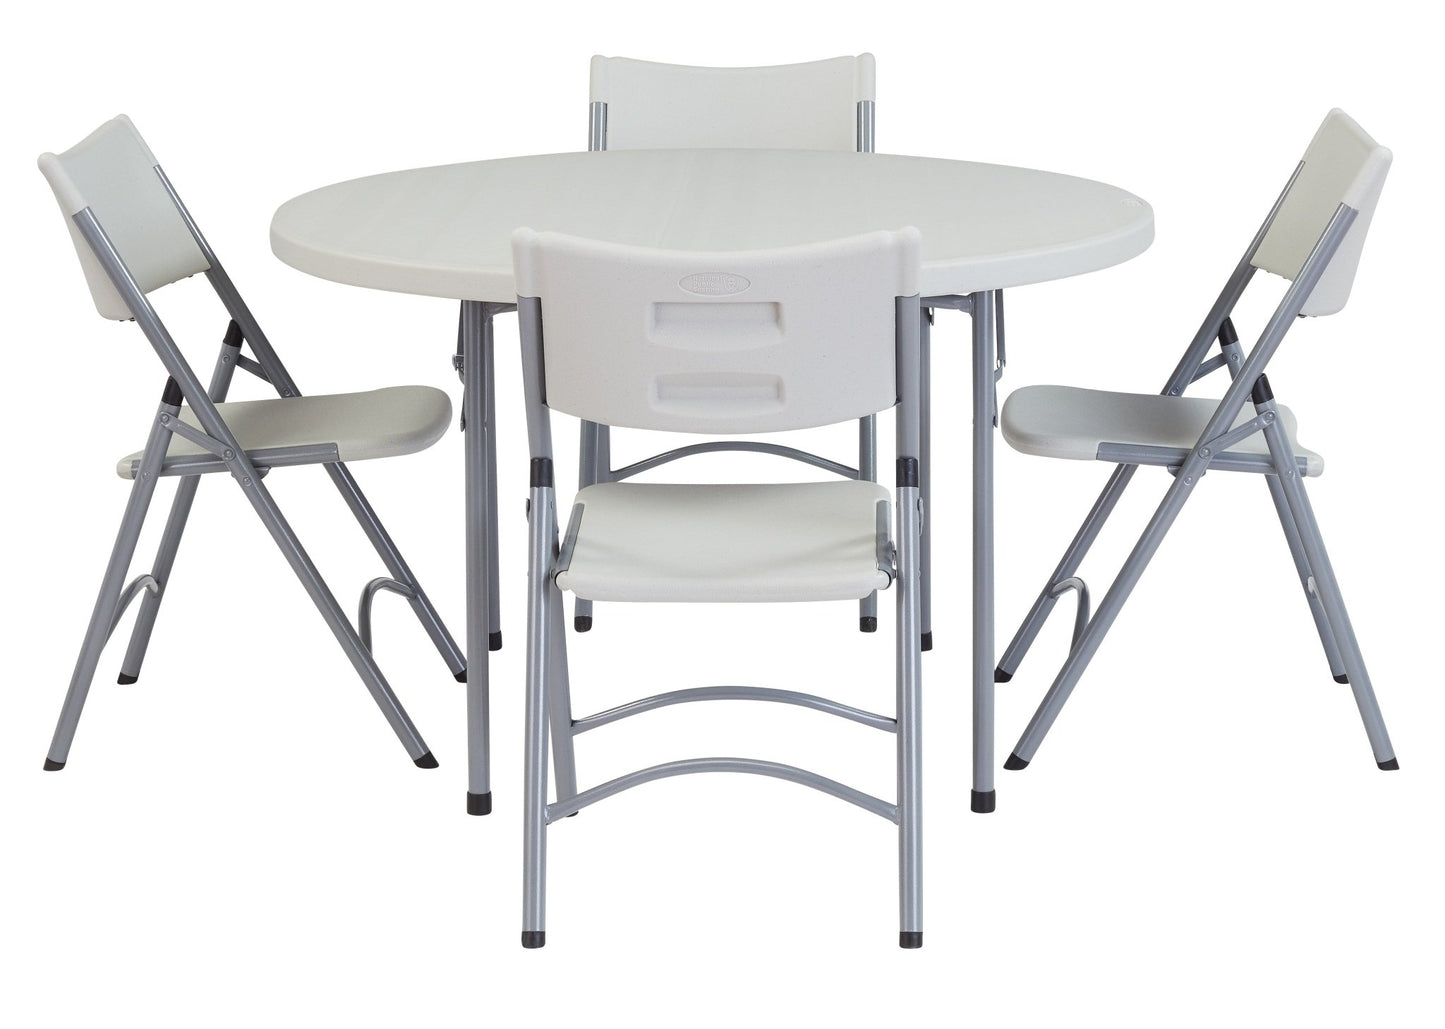 NPS Round Plastic Top Folding Table 48" Round (National Public Seating NPS-BT48R) - SchoolOutlet